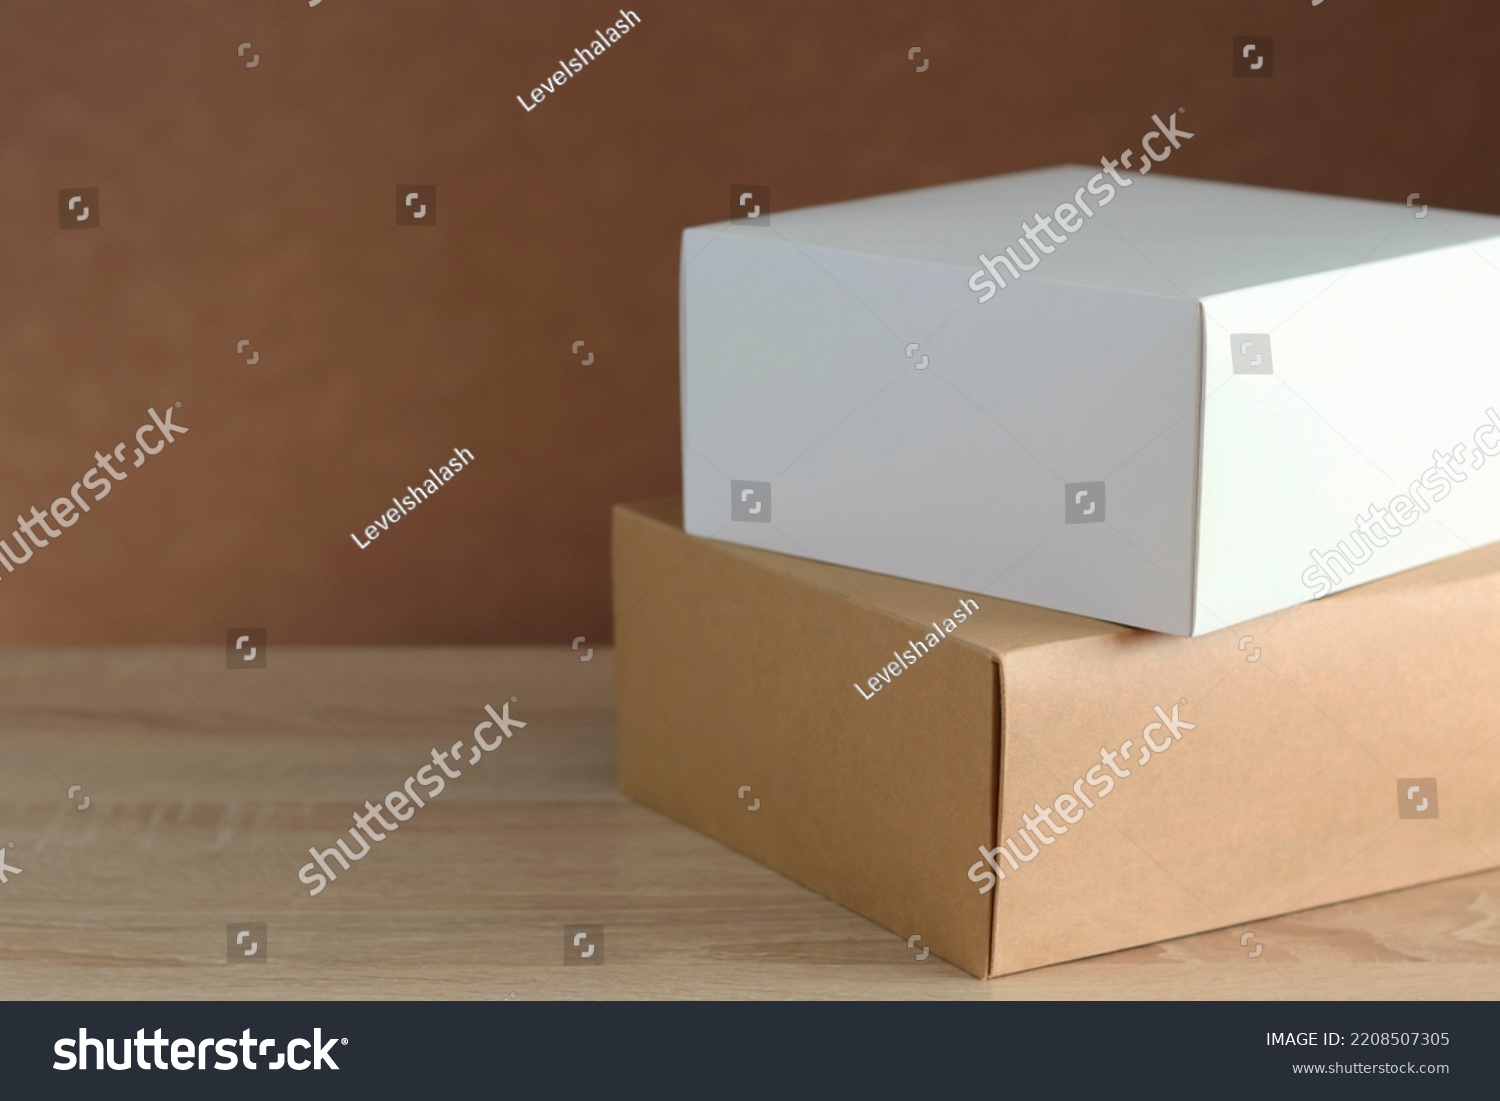 Boxes on a wooden surface, home delivery #2208507305